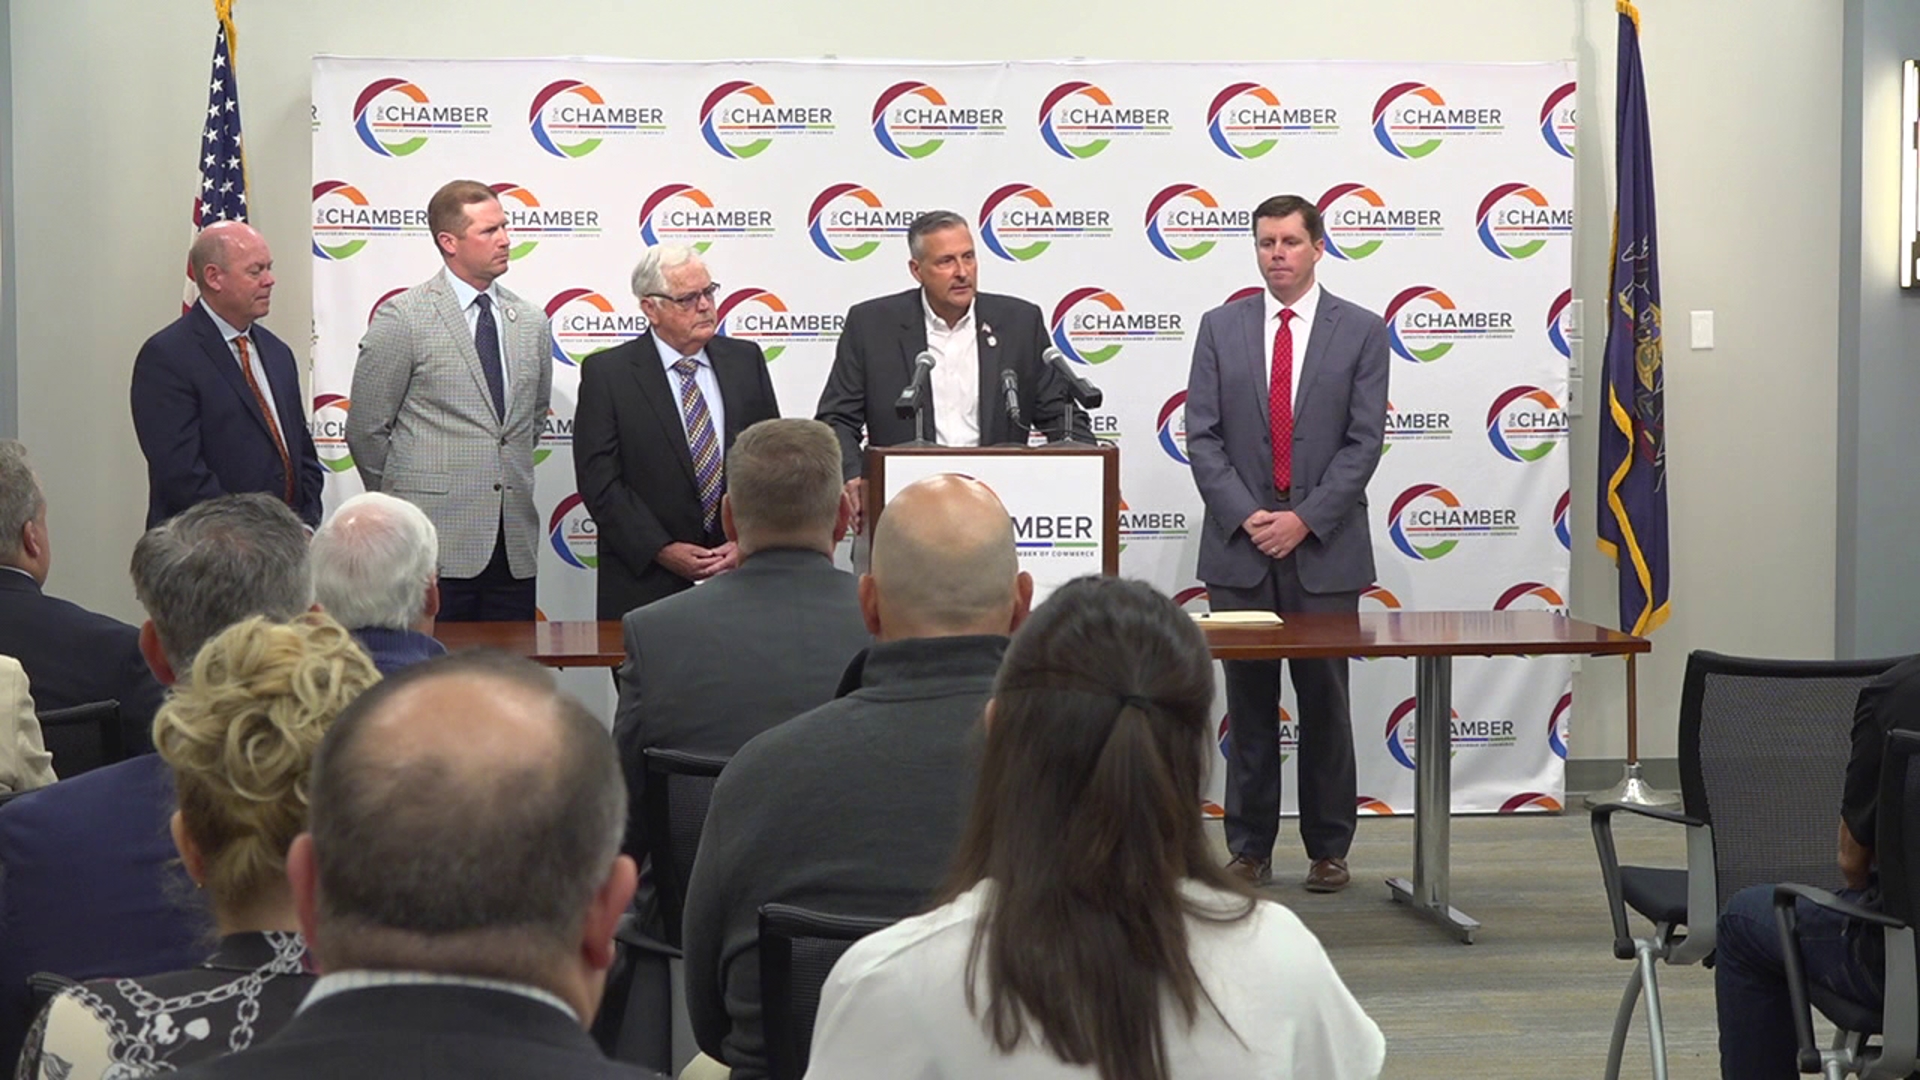 Lackawanna County and the Greater Scranton Chamber of Commerce unveiled a new partnership Wednesday morning.